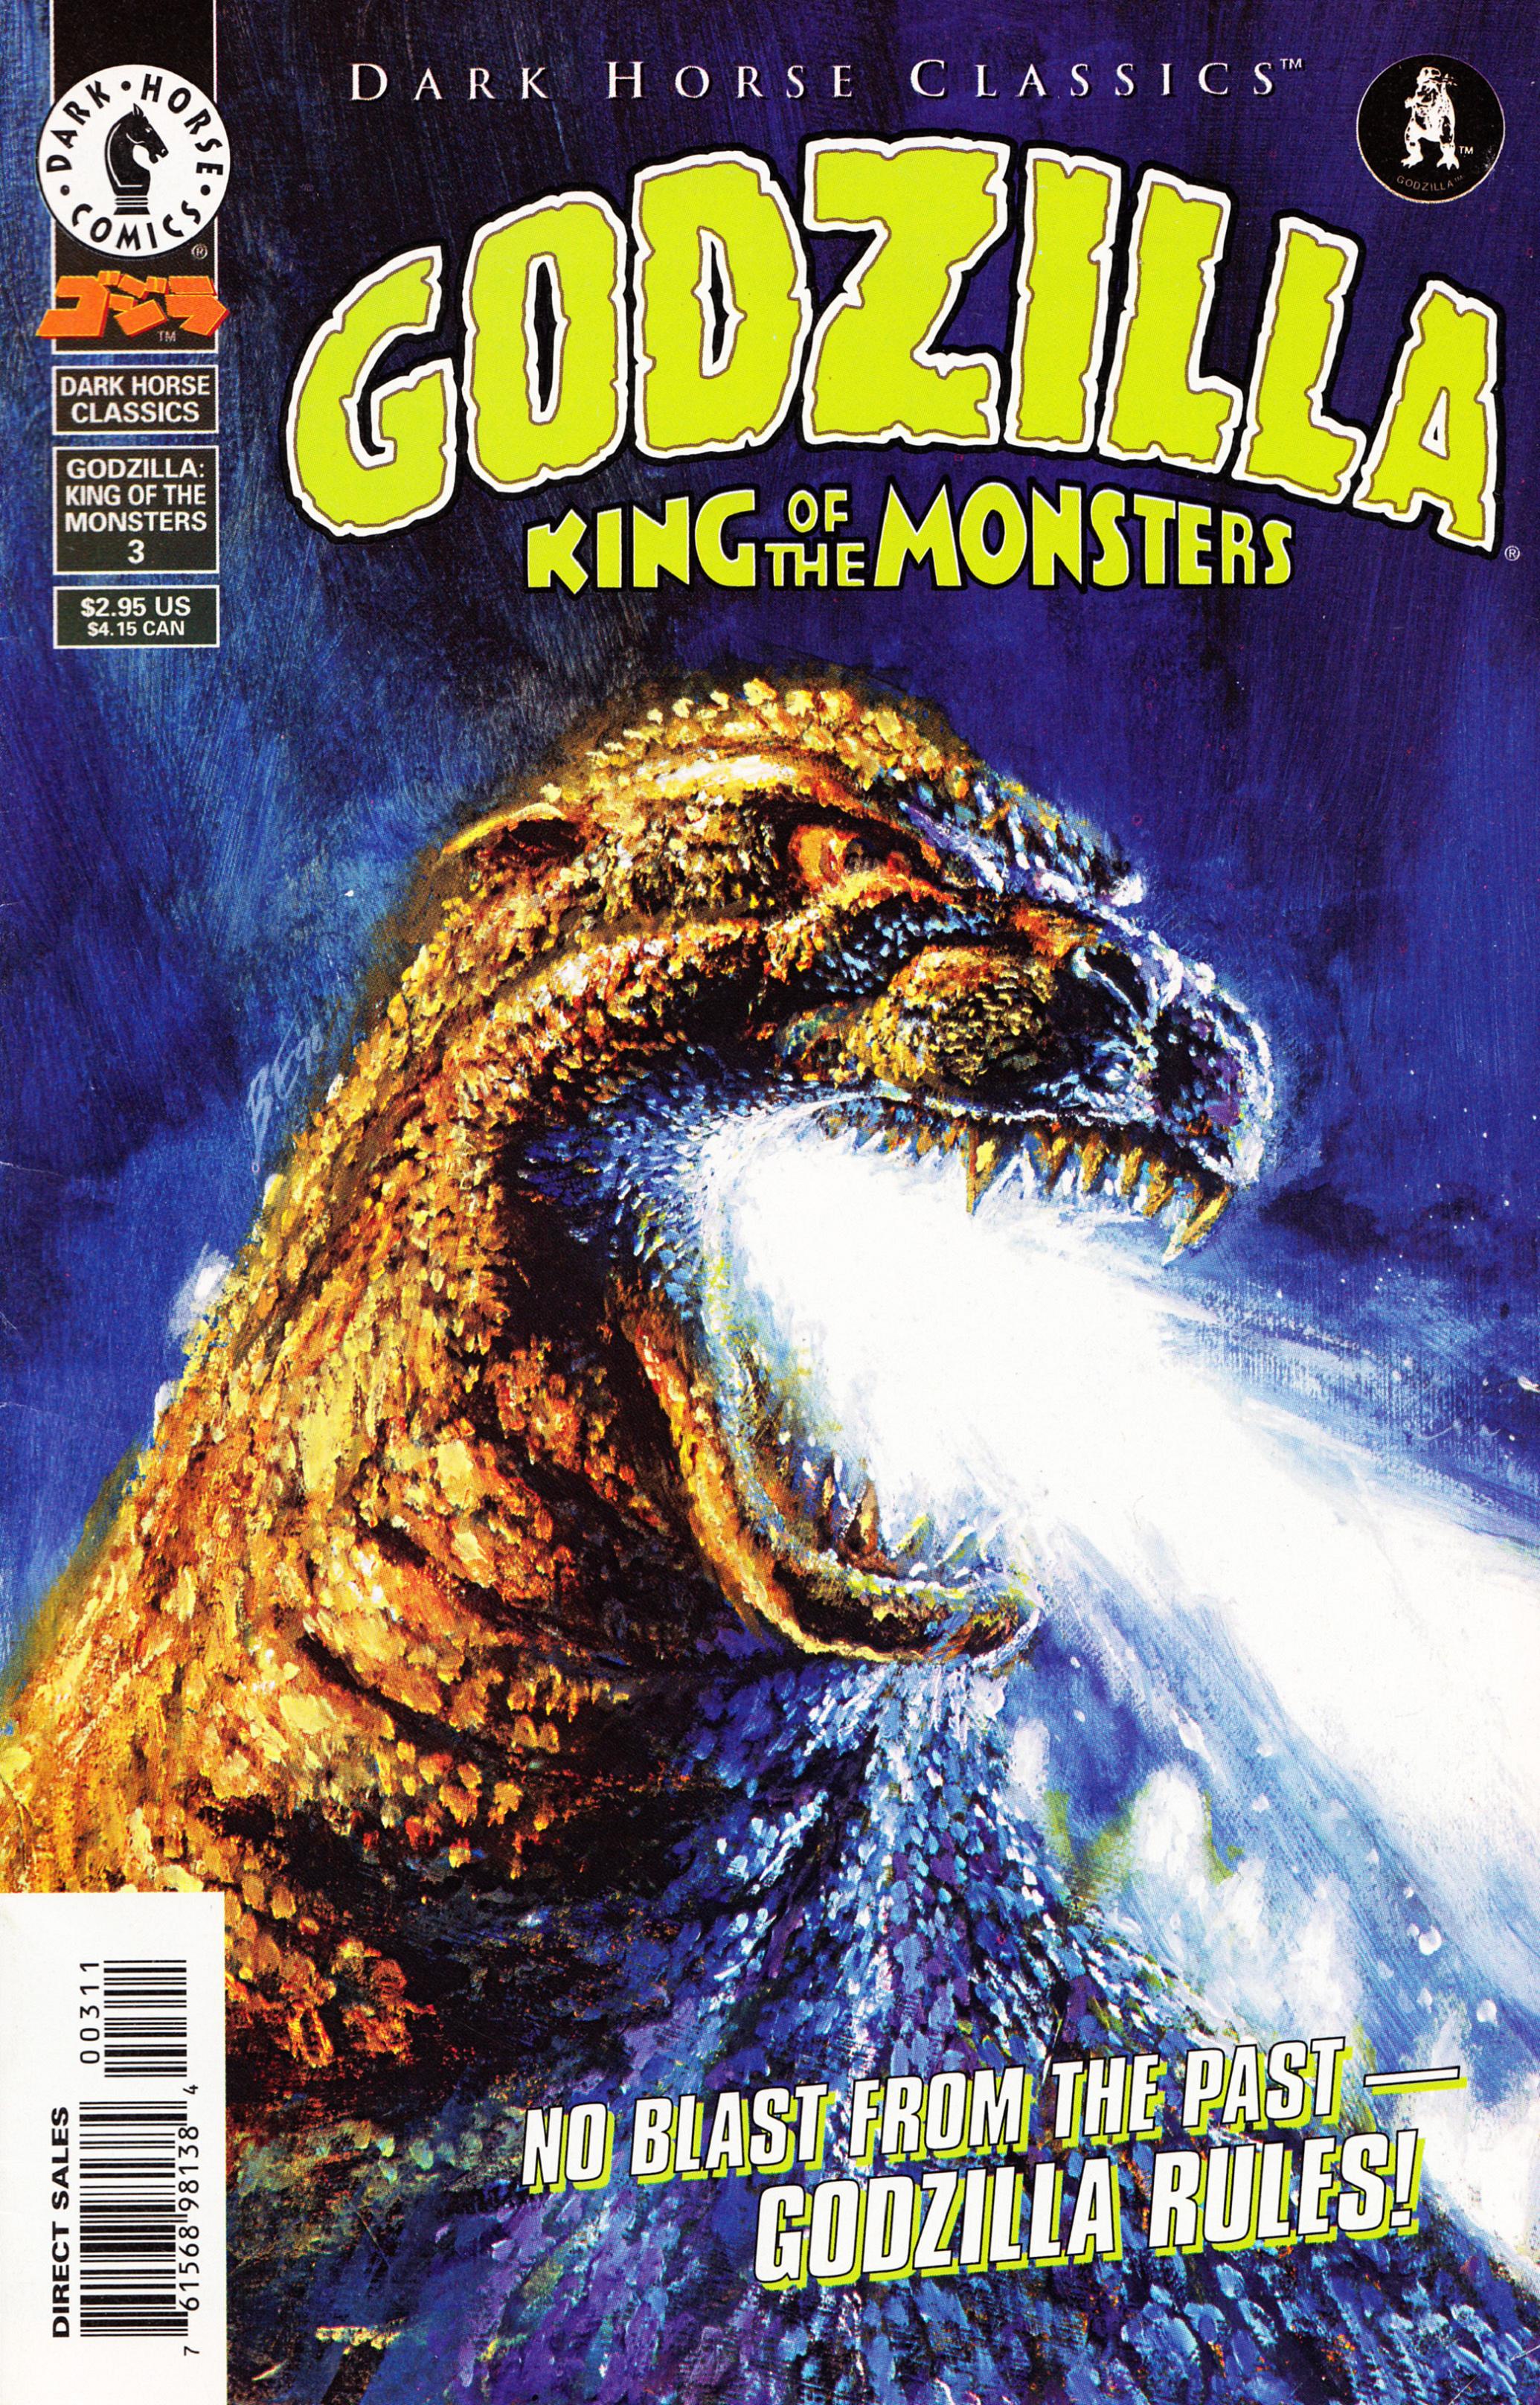 Read online Dark Horse Classics: Godzilla - King of the Monsters comic -  Issue #3 - 1